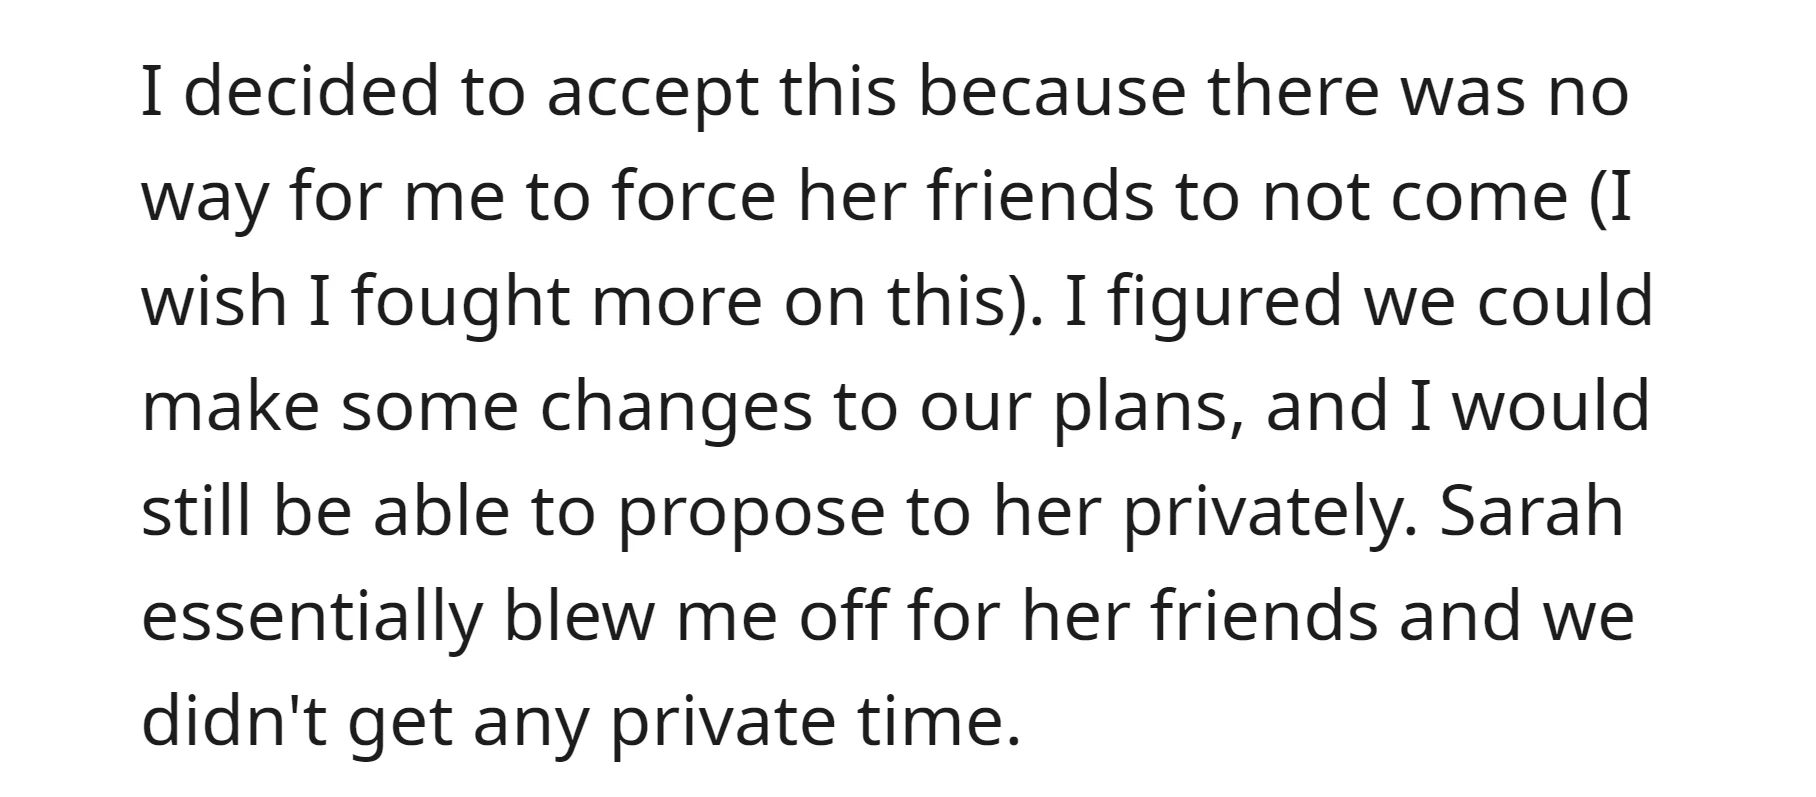 Sarah prioritized her friends over their plans, so OP didn't have private time to propose as originally intended